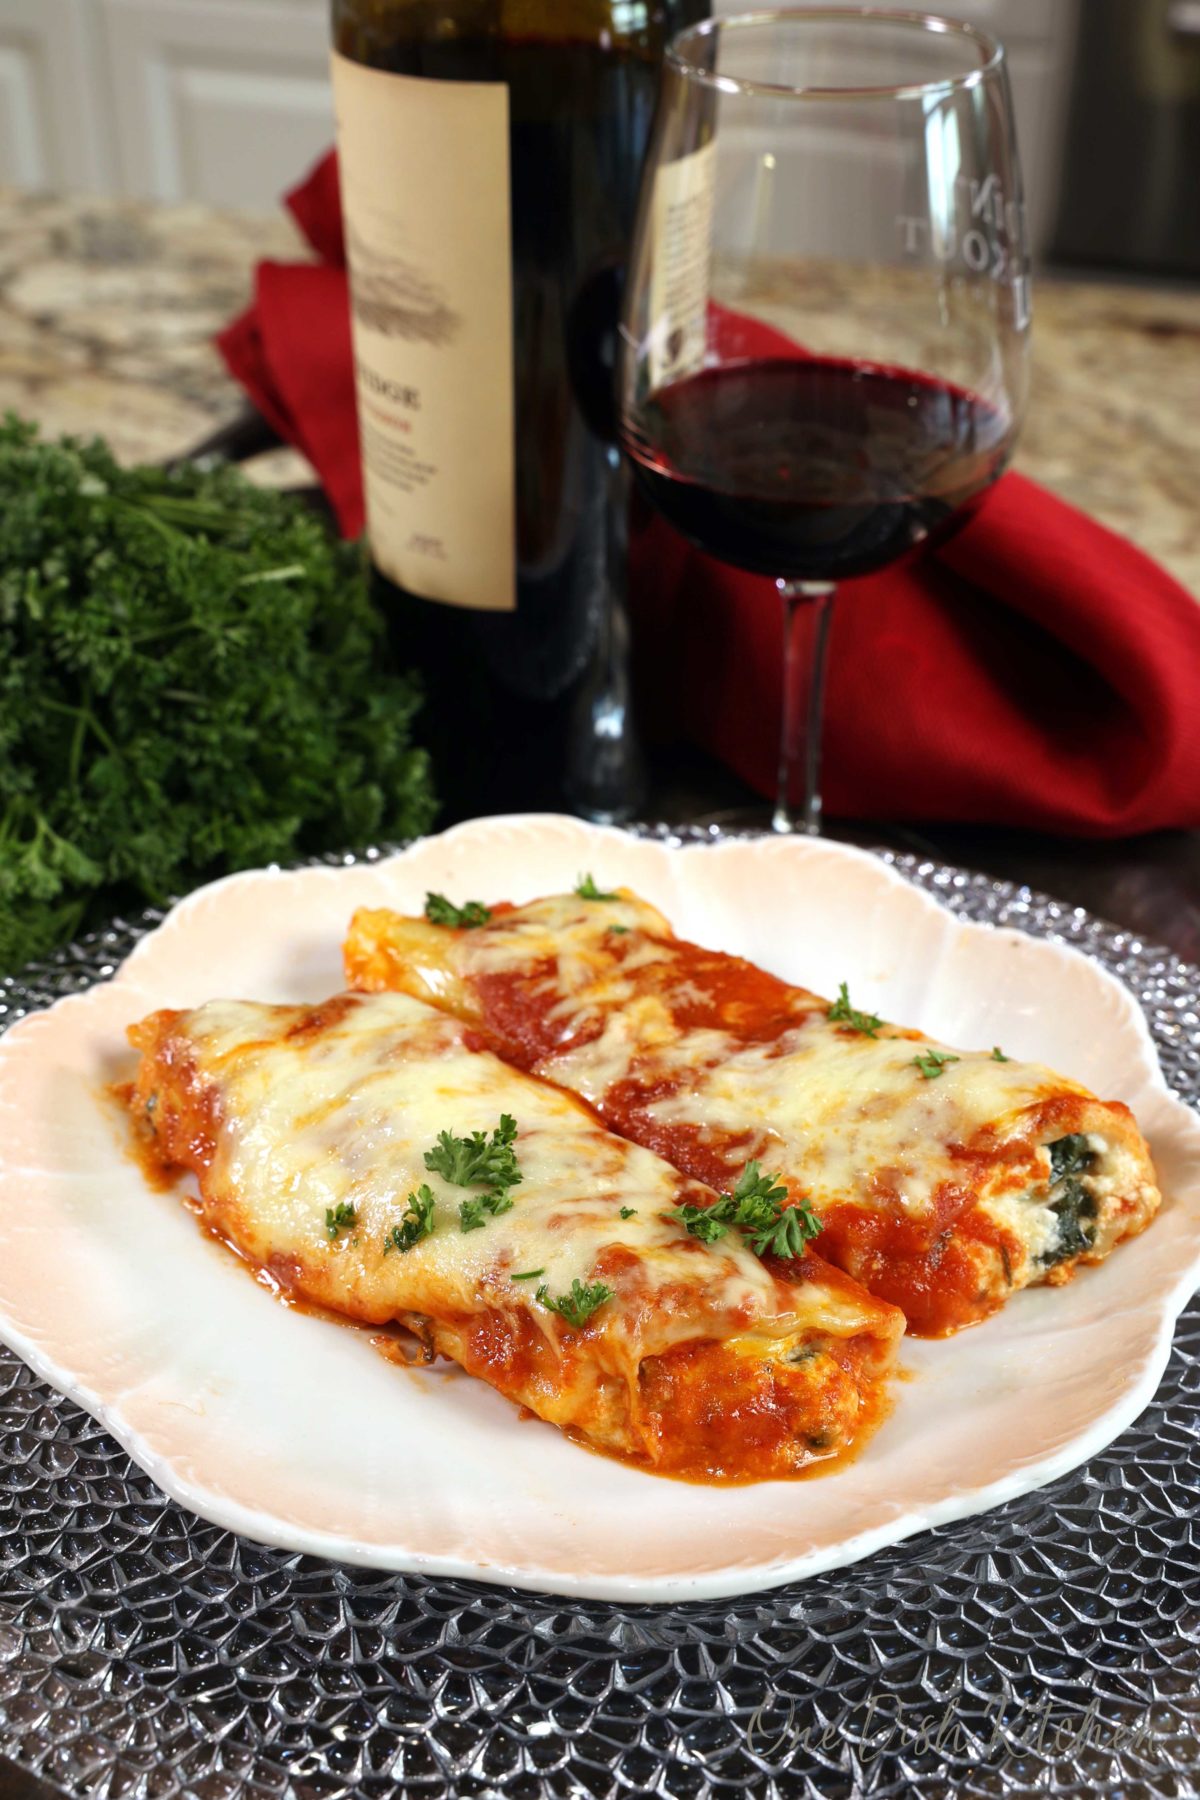 two stuffed manicotti shells on a white plate next to a bottle of red wine.